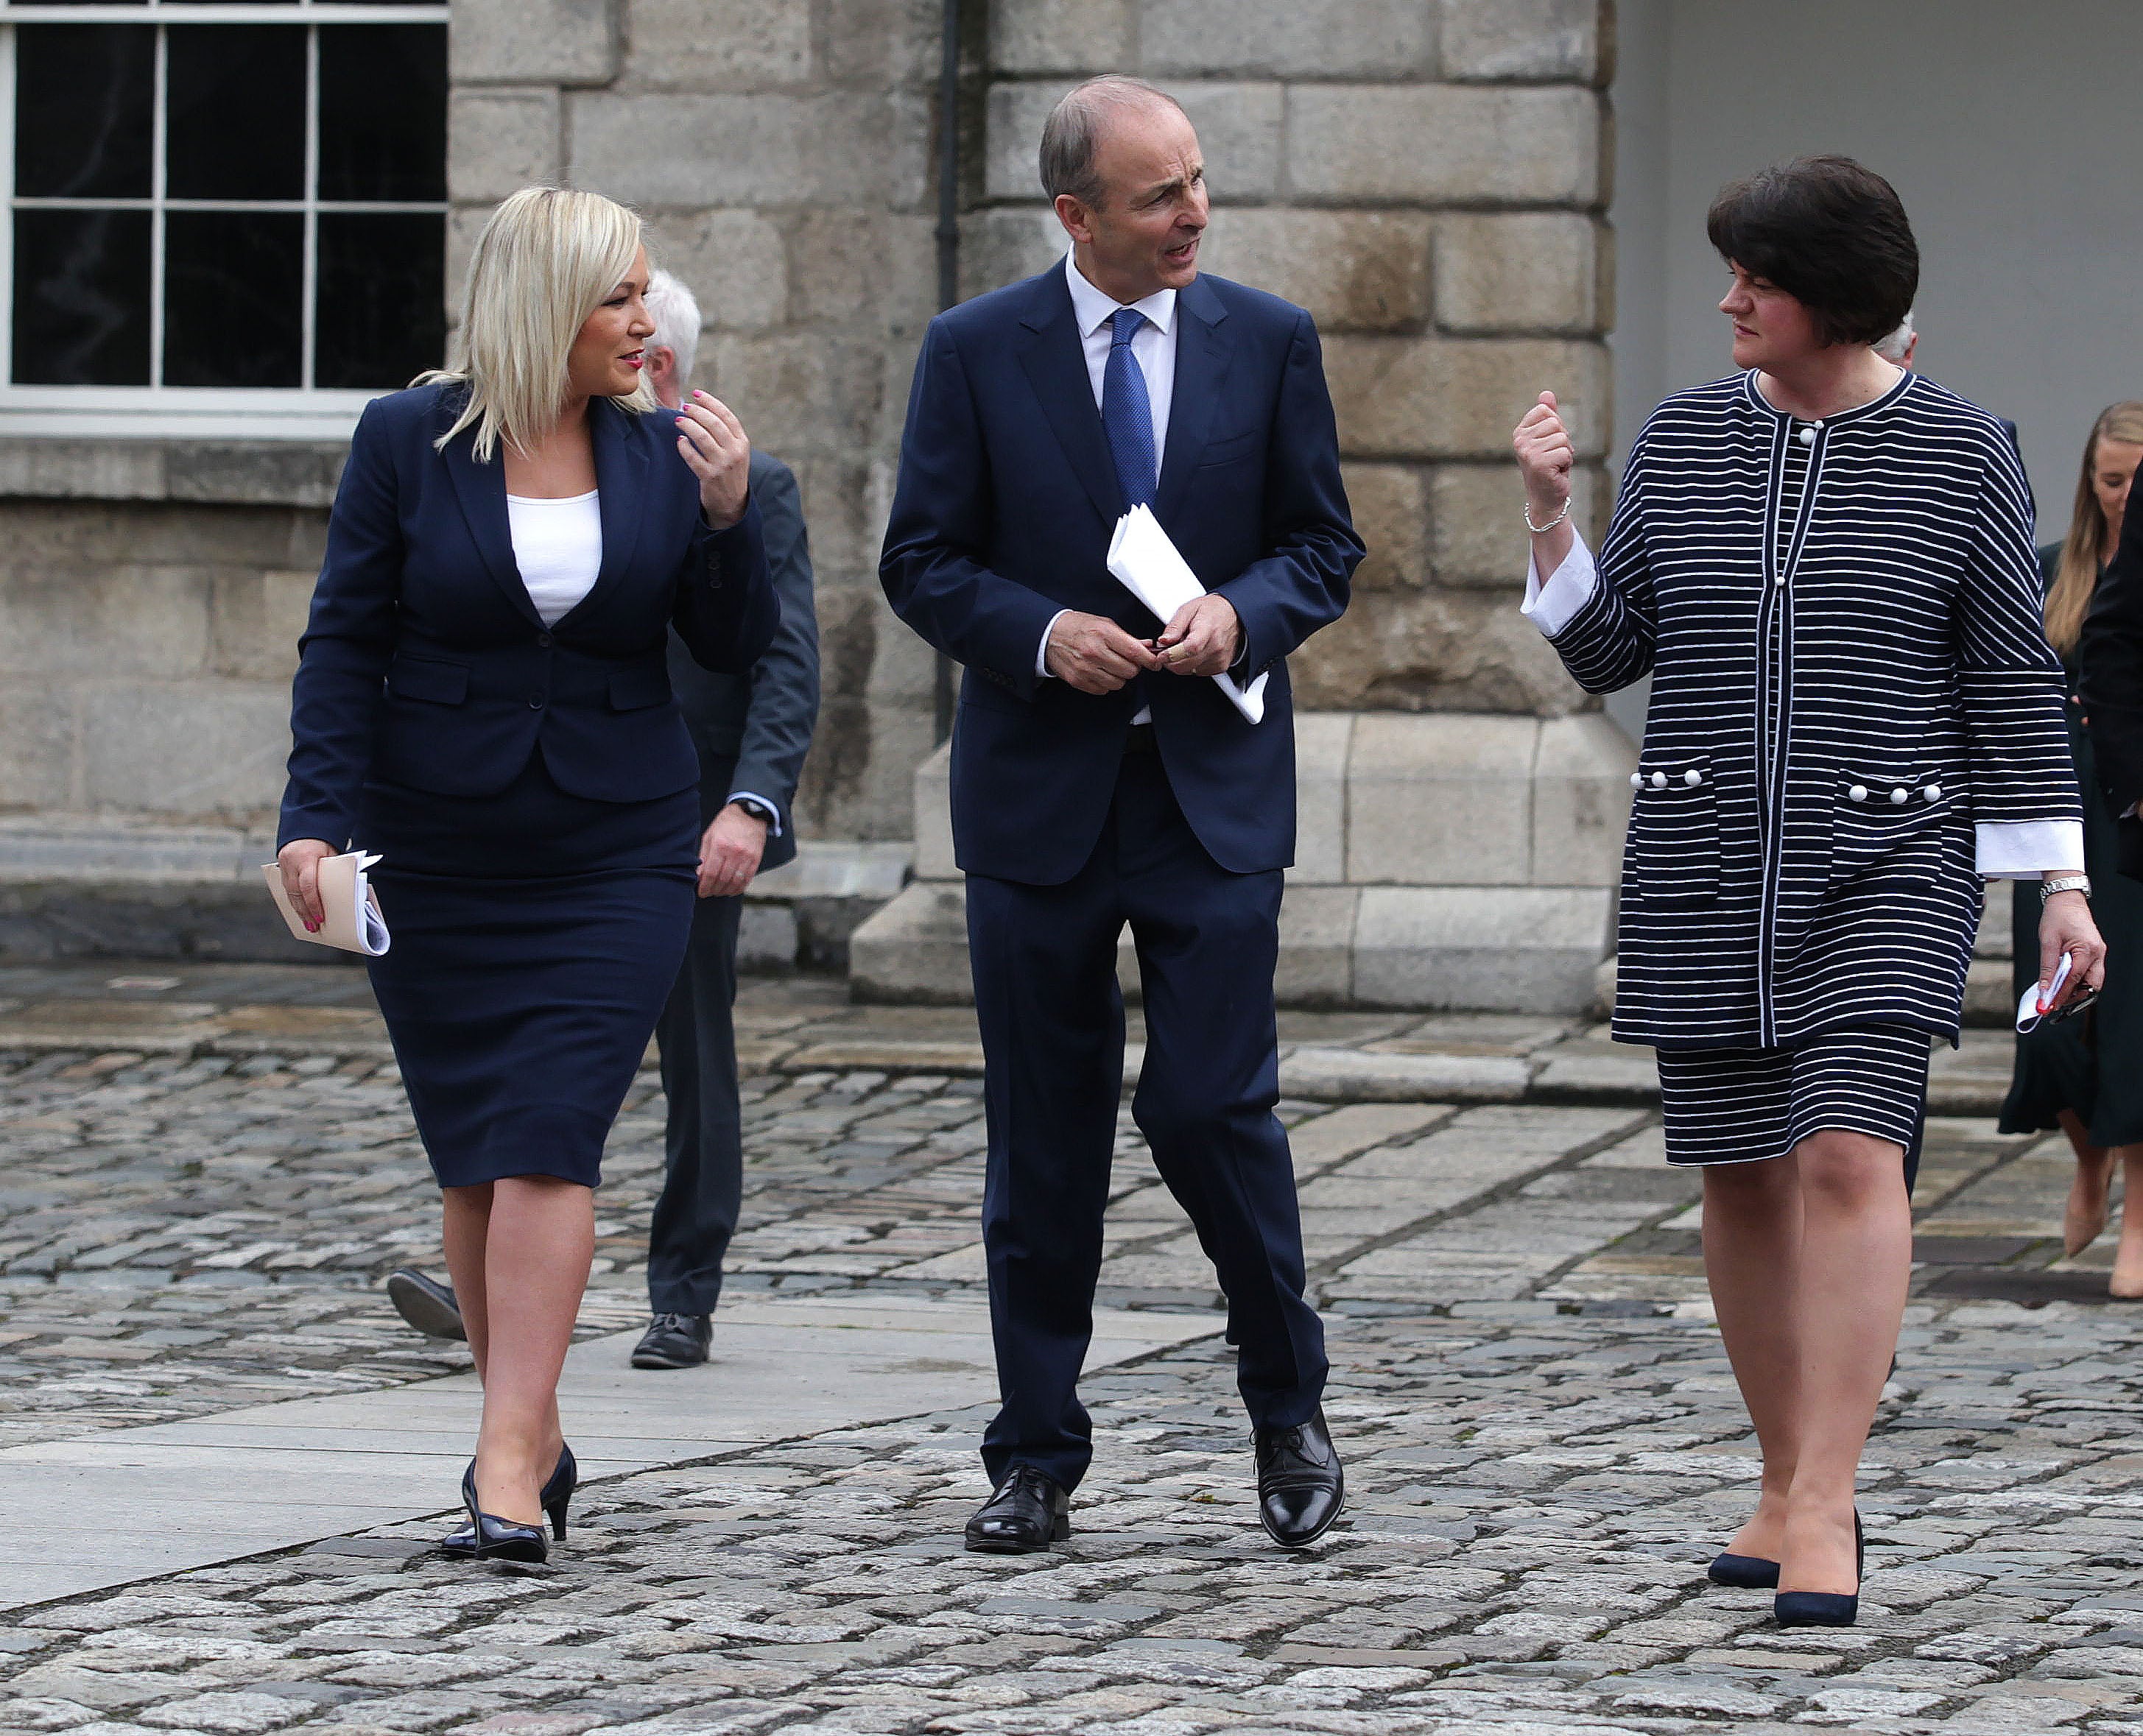 (left to right) Deputy First Minister Michelle O’Neill, Taoiseach Micheal Martin and former First Minister Arlene Foster attend a North South Ministerial Council (NSMC) meeting in Dublin in 2020 (Damien Eagers/PA)